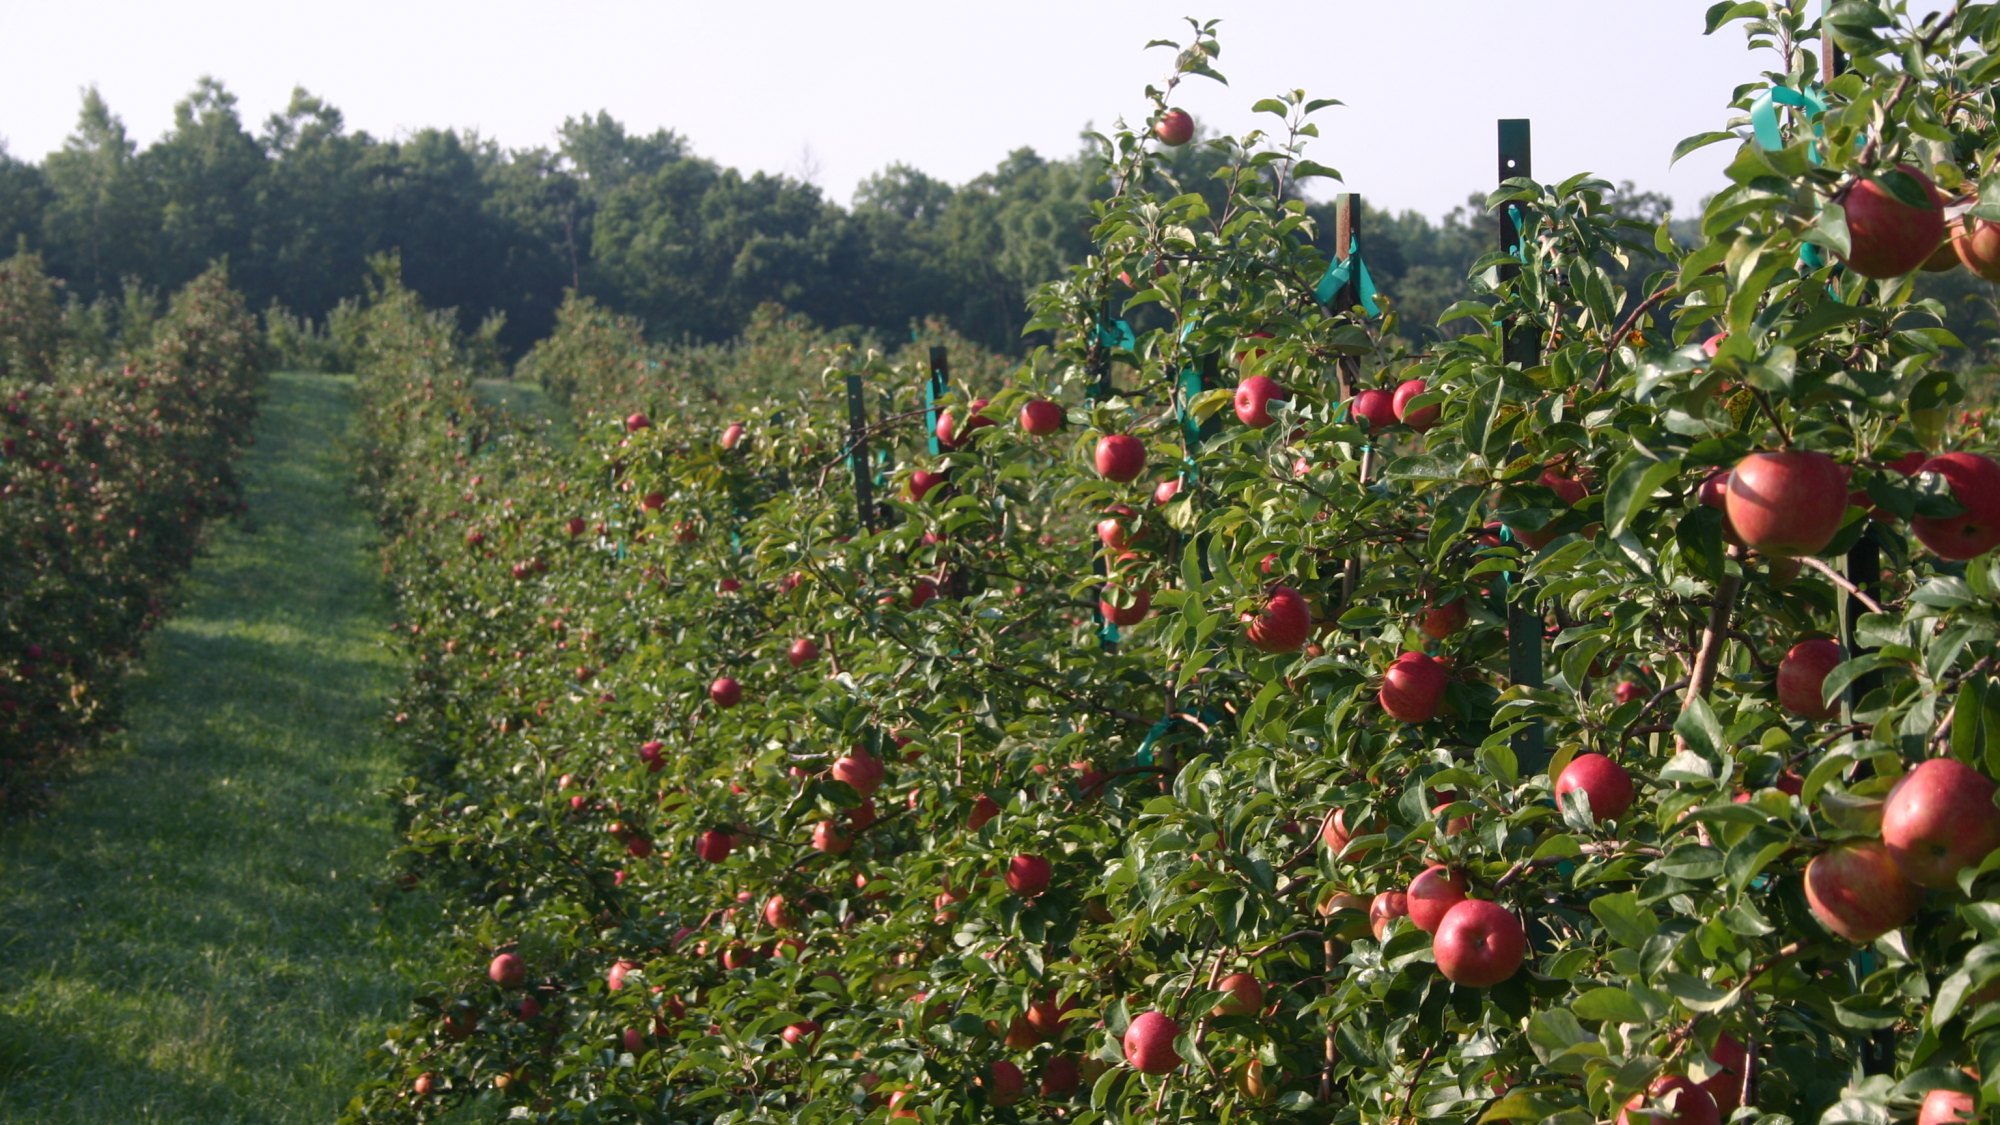 Welcome to Sunrise Orchards the APPLE DESTINATION of the Midwest!